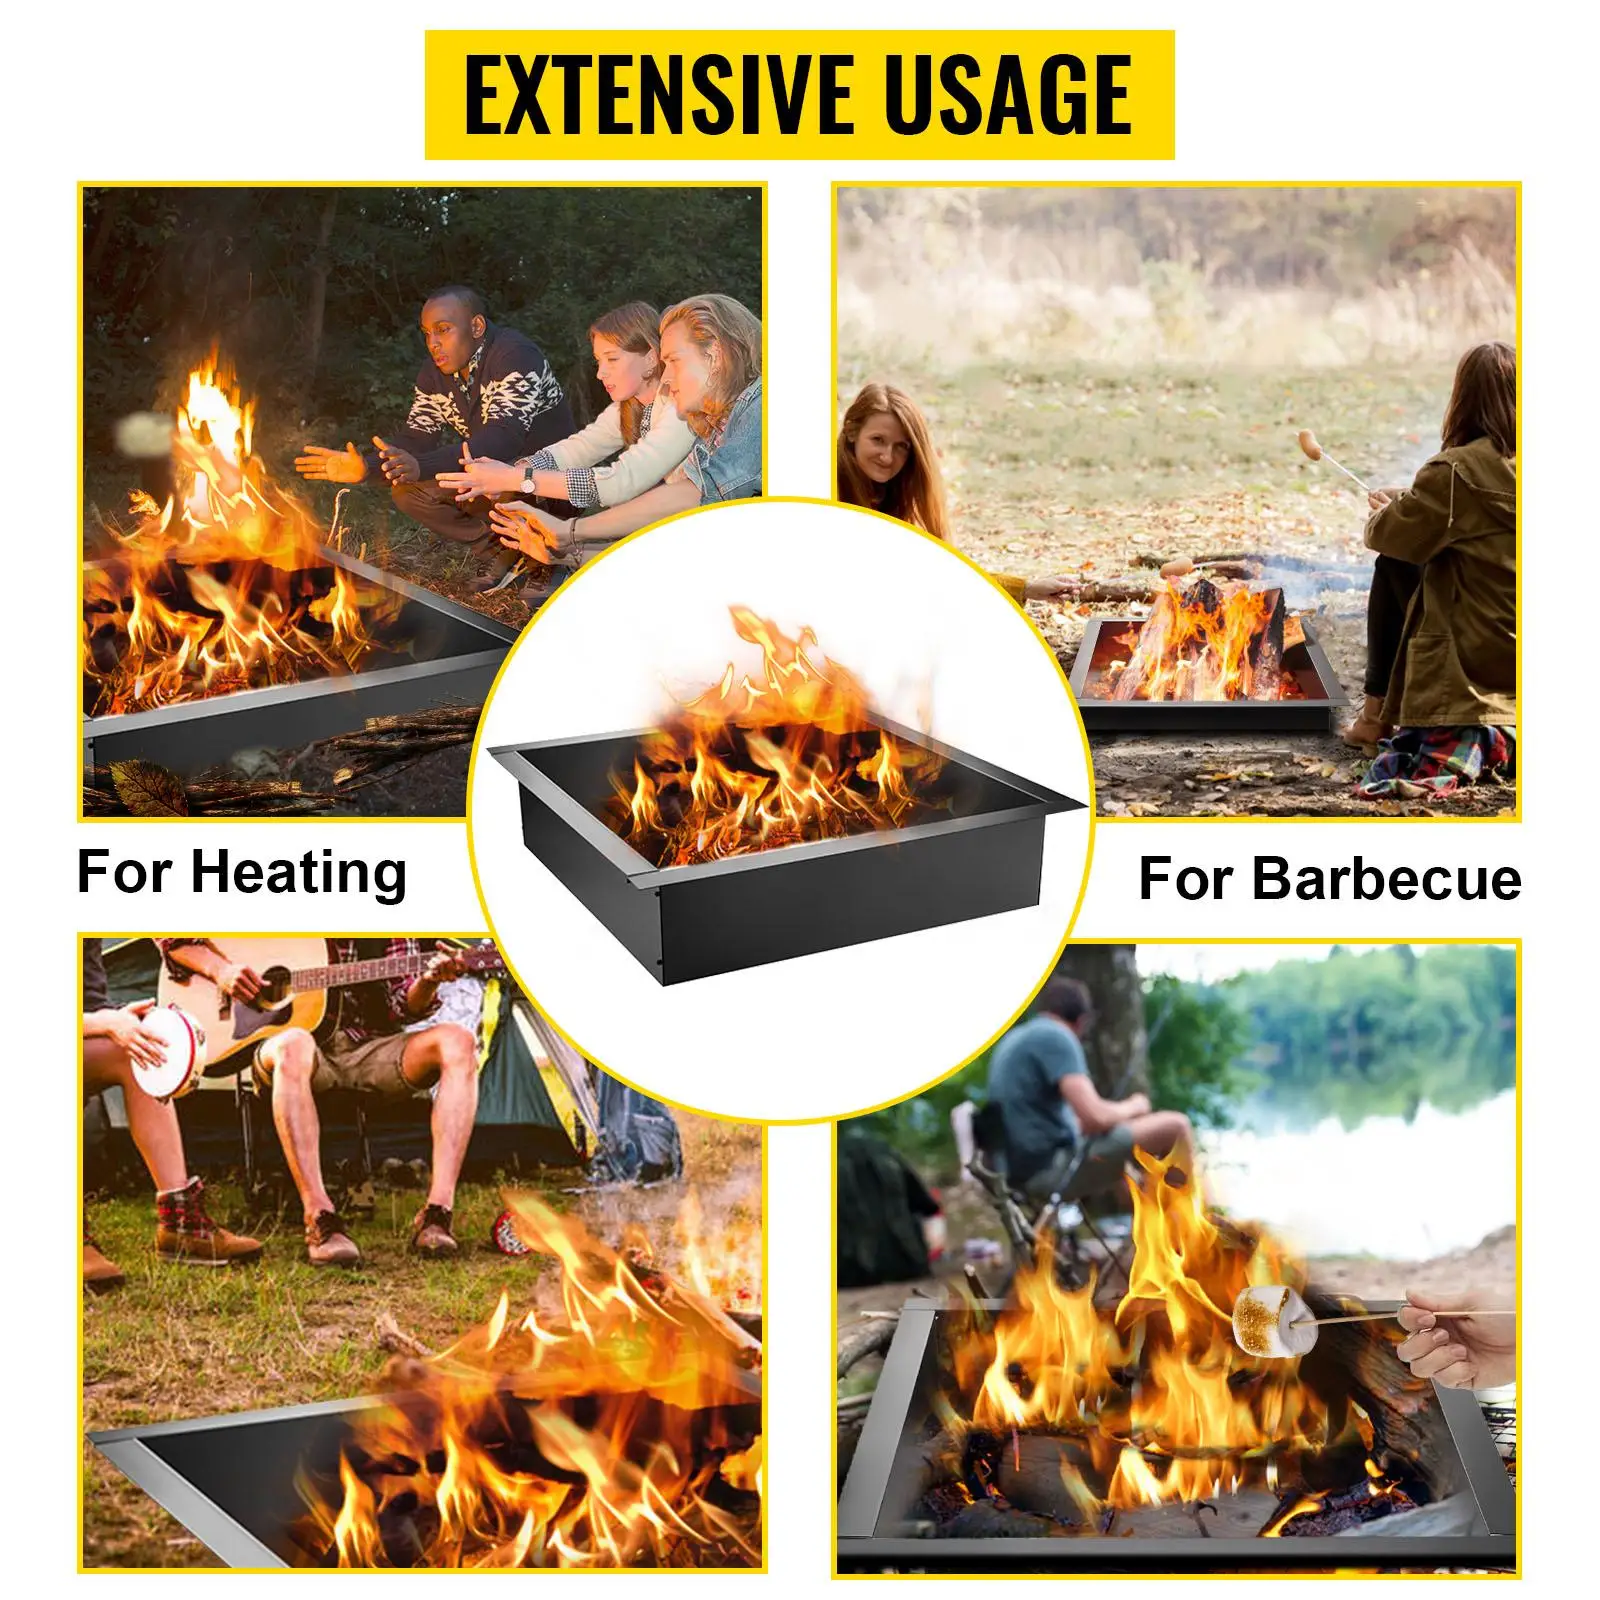 usage of fire pit